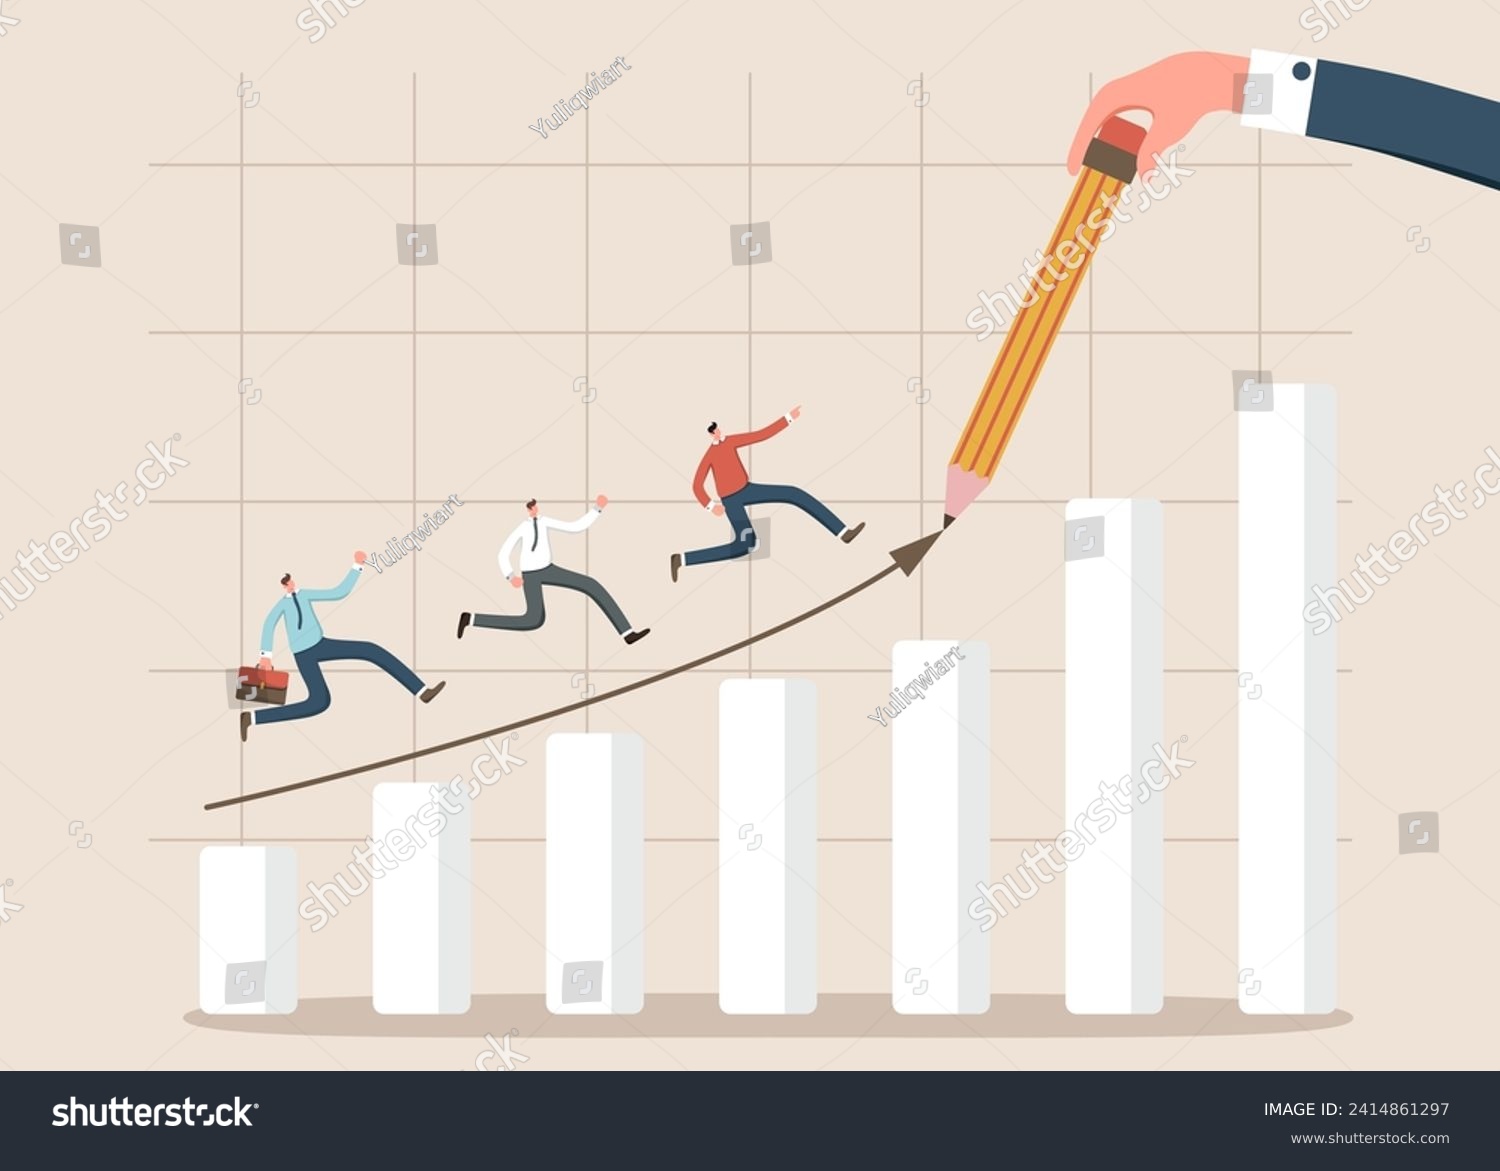 SVG of Mentoring in creating a path to reach the top, helping in overcoming obstacles and receiving rewards, analyzing and planning for success or high results in business, hand drawing path to top of graph. svg